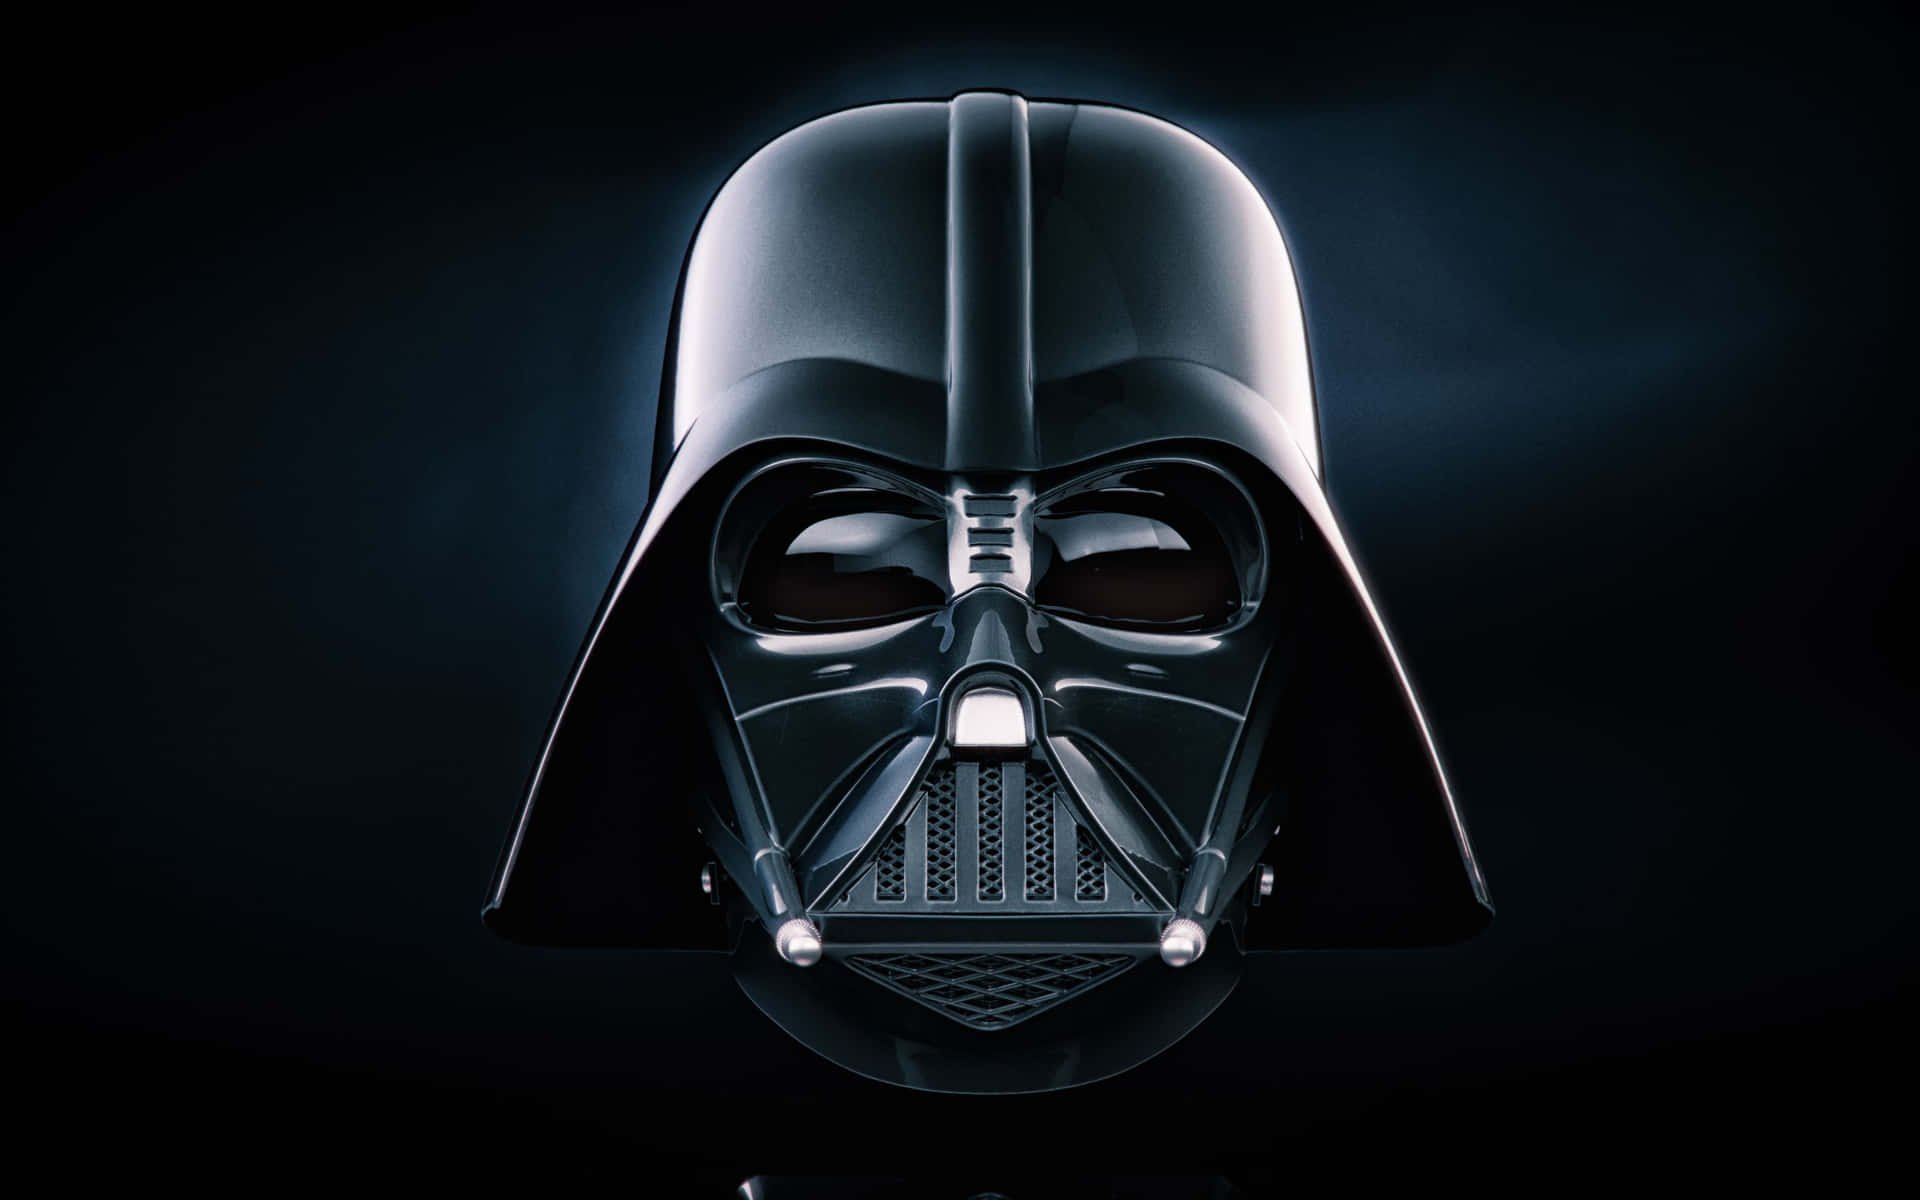 Image  Darth Vader, the Legendary Sith Lord